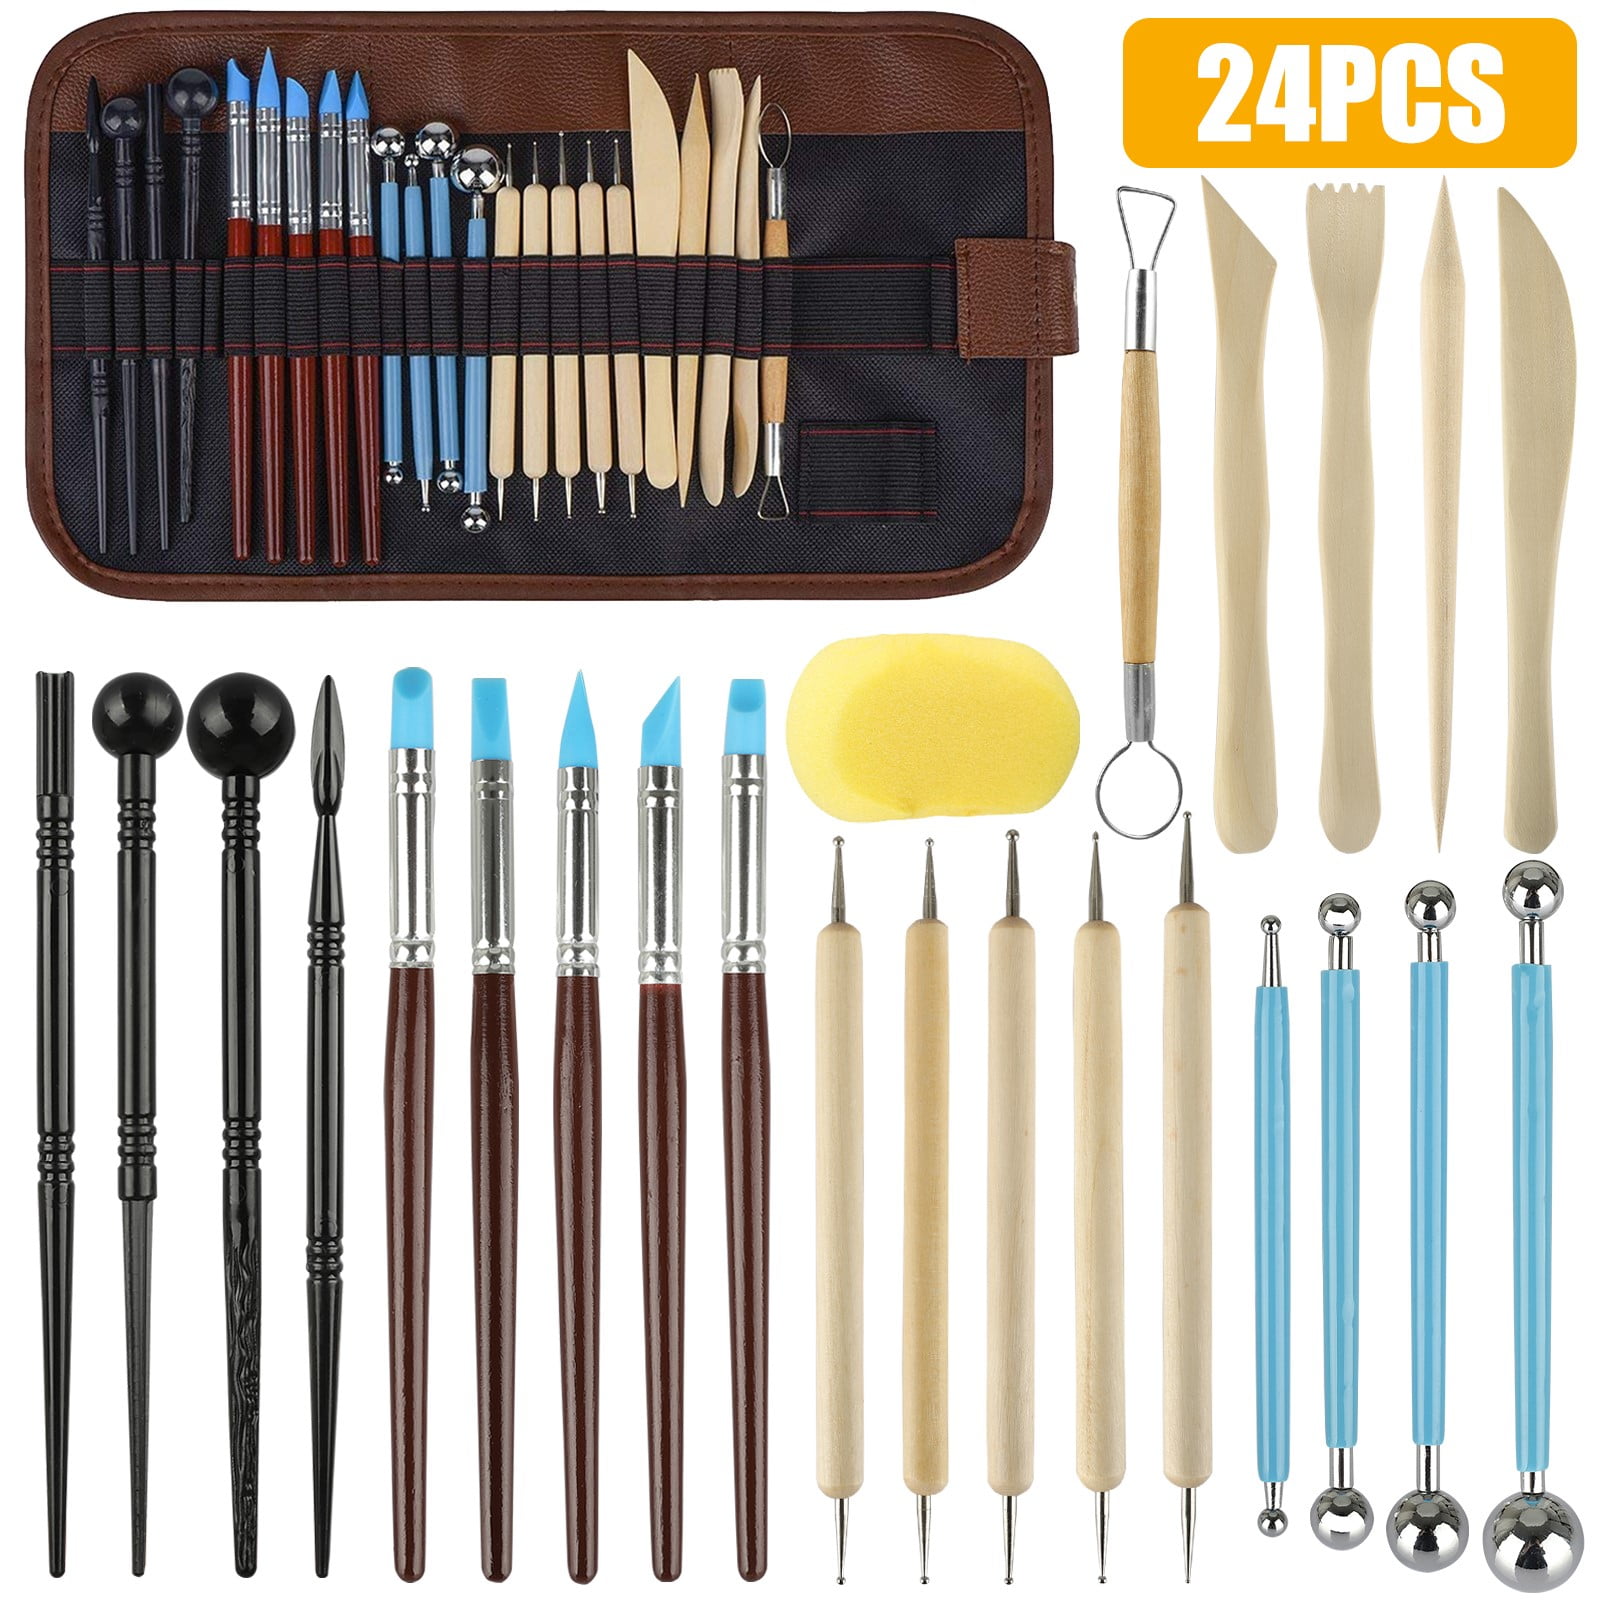 Clay Modeling Tool Sets Spherical Dot Tools Wooden Pottery Carving Tools for Carving Artistic DIY Embossing Modelling Clay Reusable Pottery Sculpting Tools 24PCS Polymer Clay Tools 